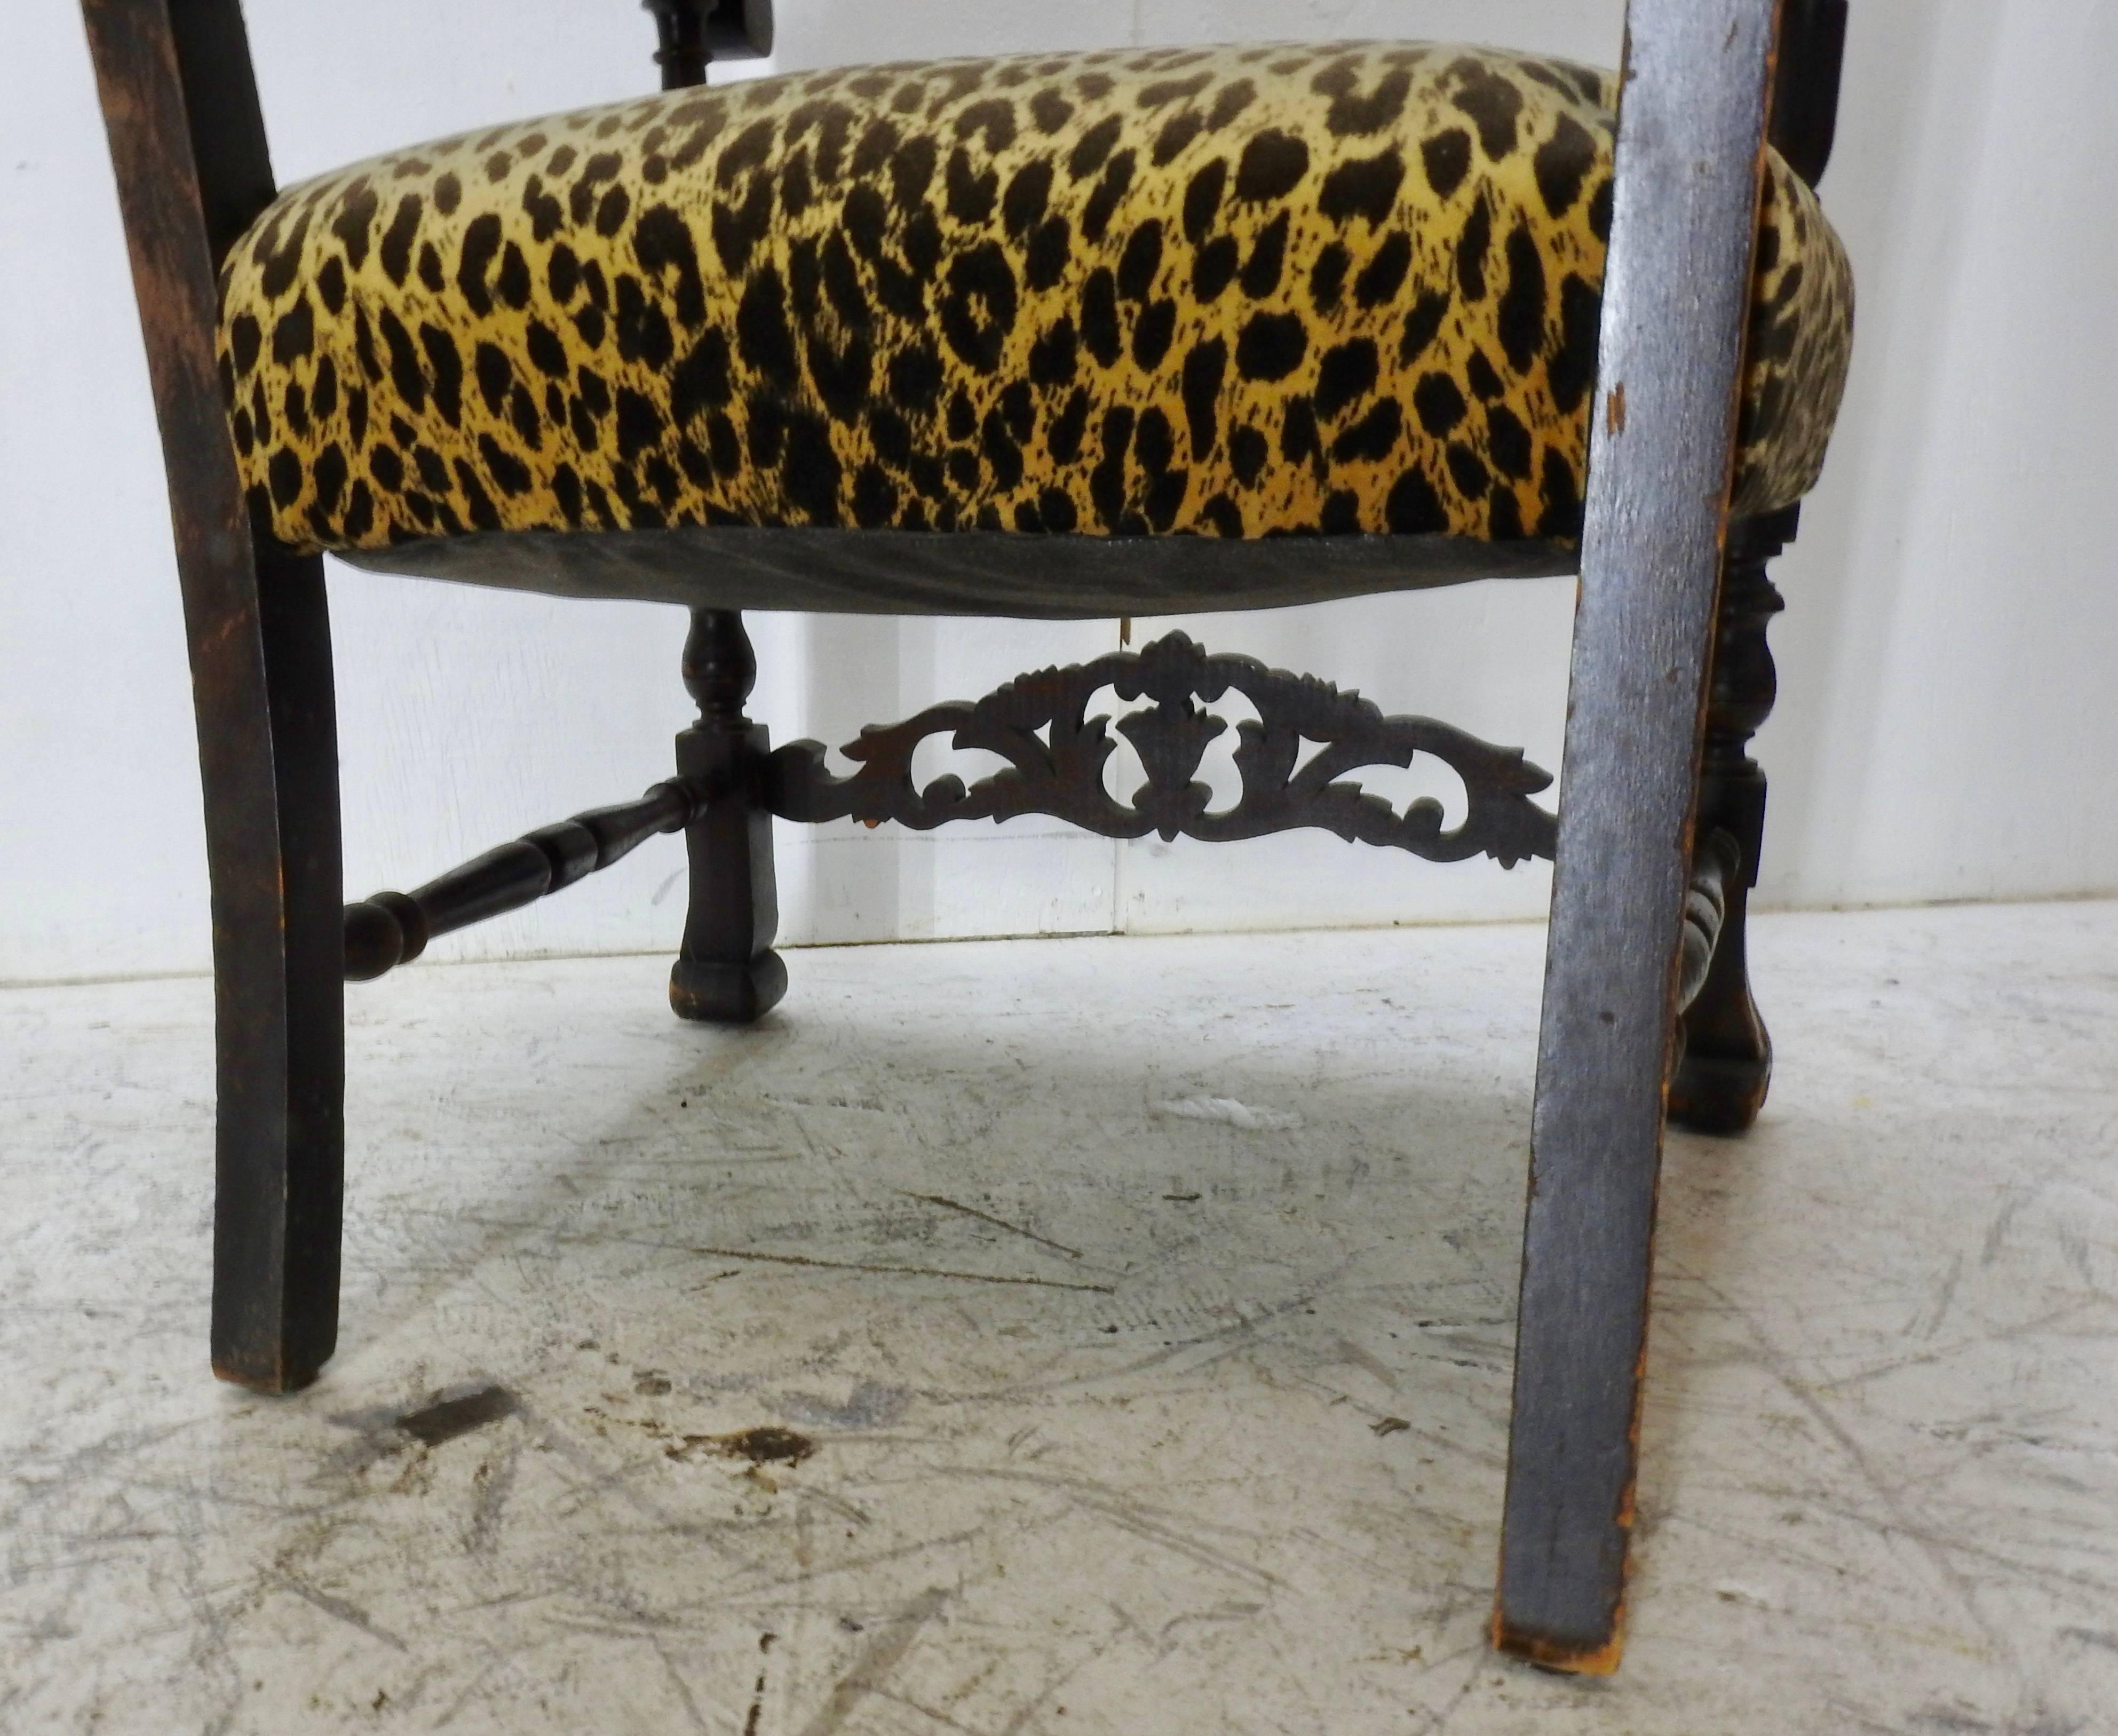 19th Century German Hand-Carved High Back Chair with Leopard Print Upholstery 4